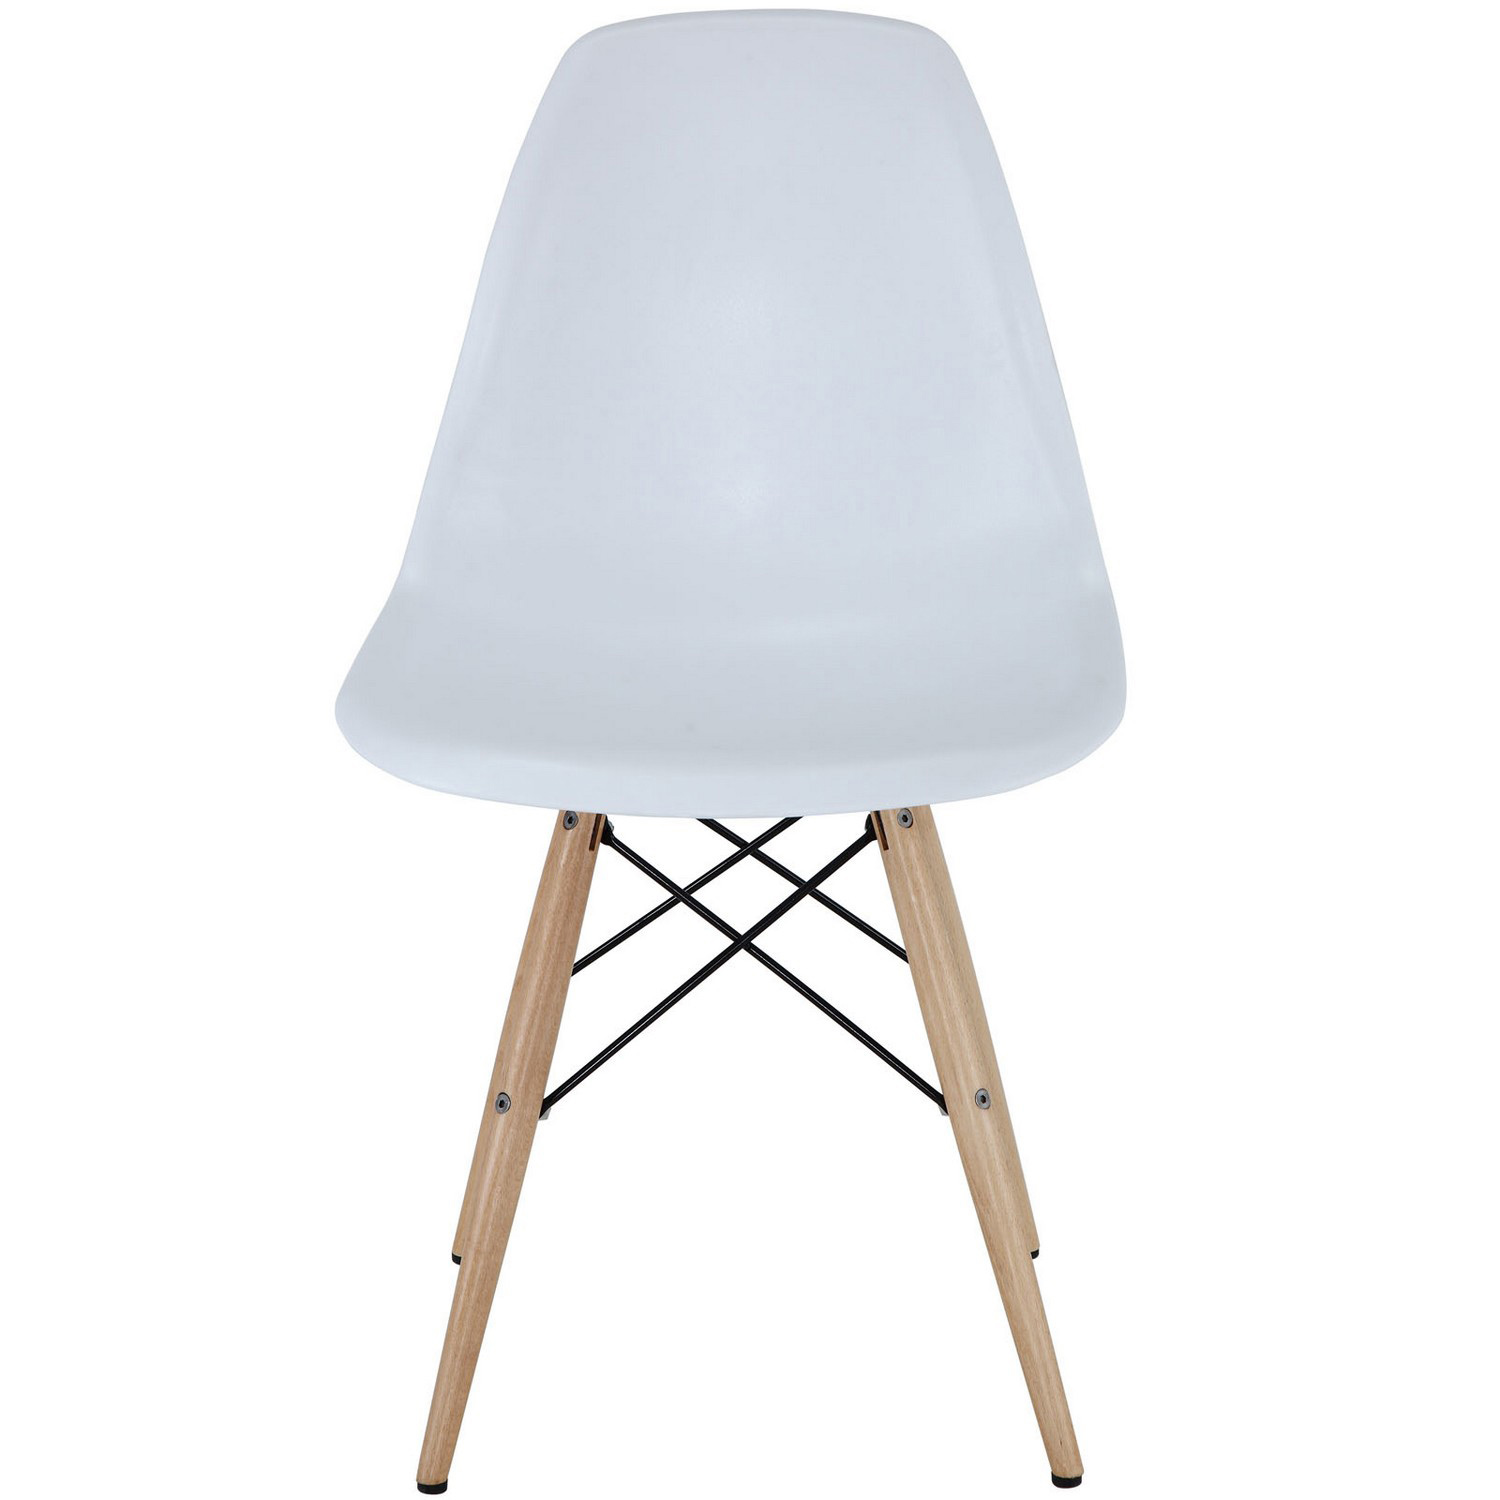 Modway Pyramid Dining Side Chair - White